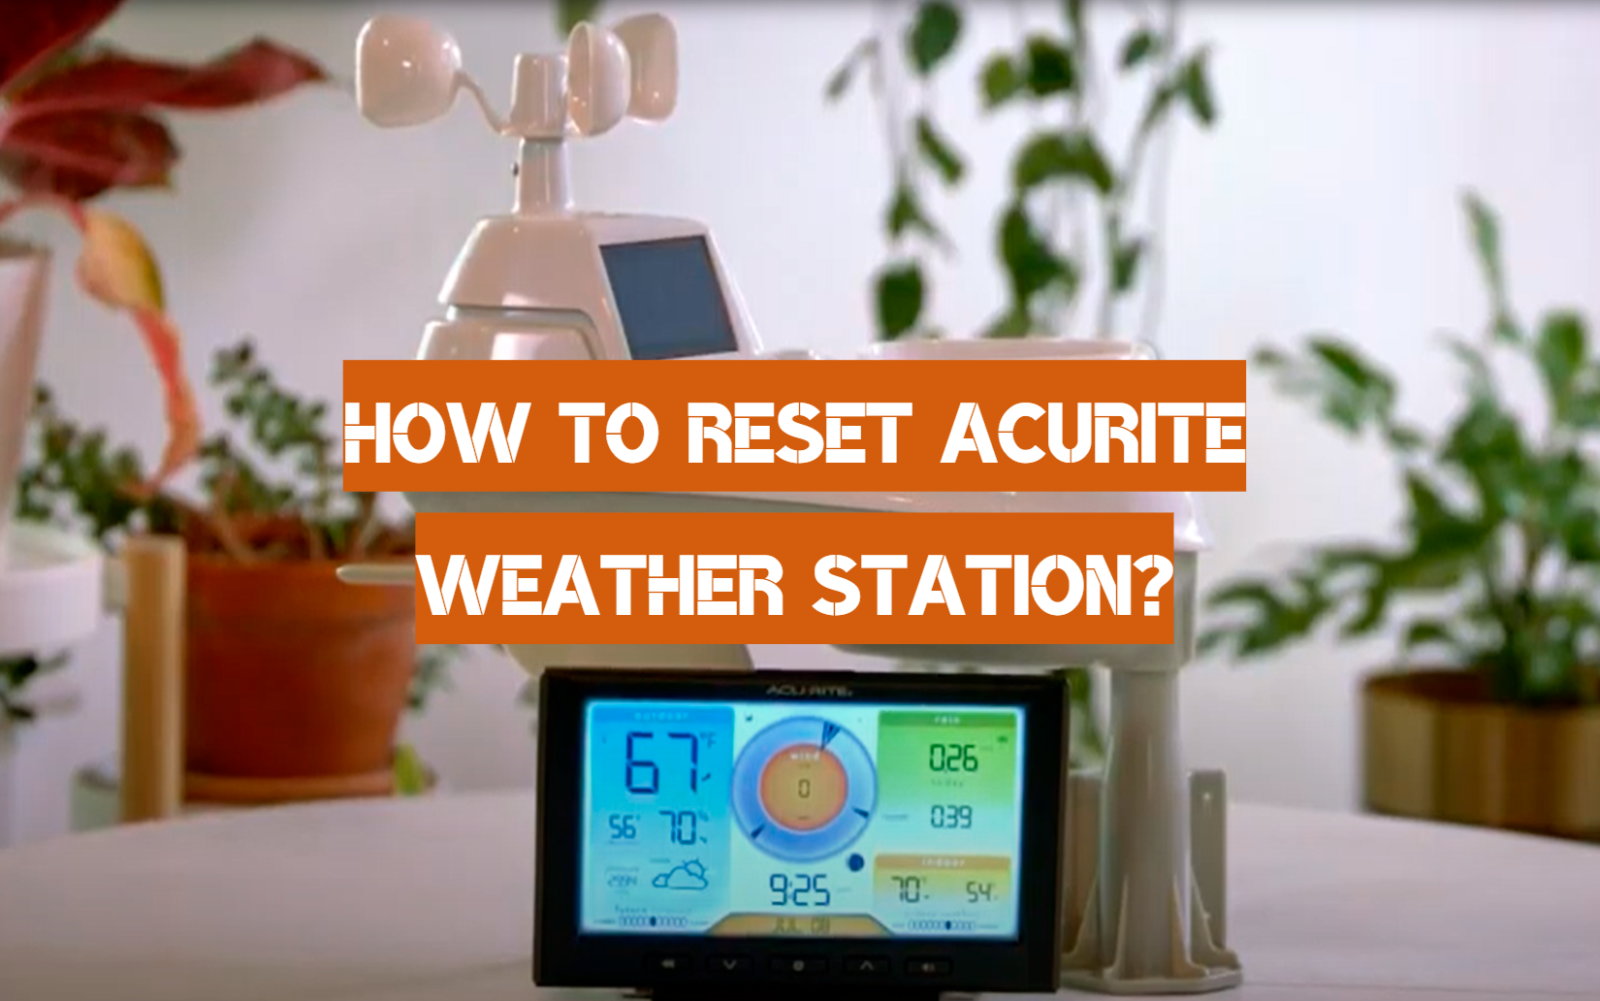 How to Reset AcuRite Weather Station?